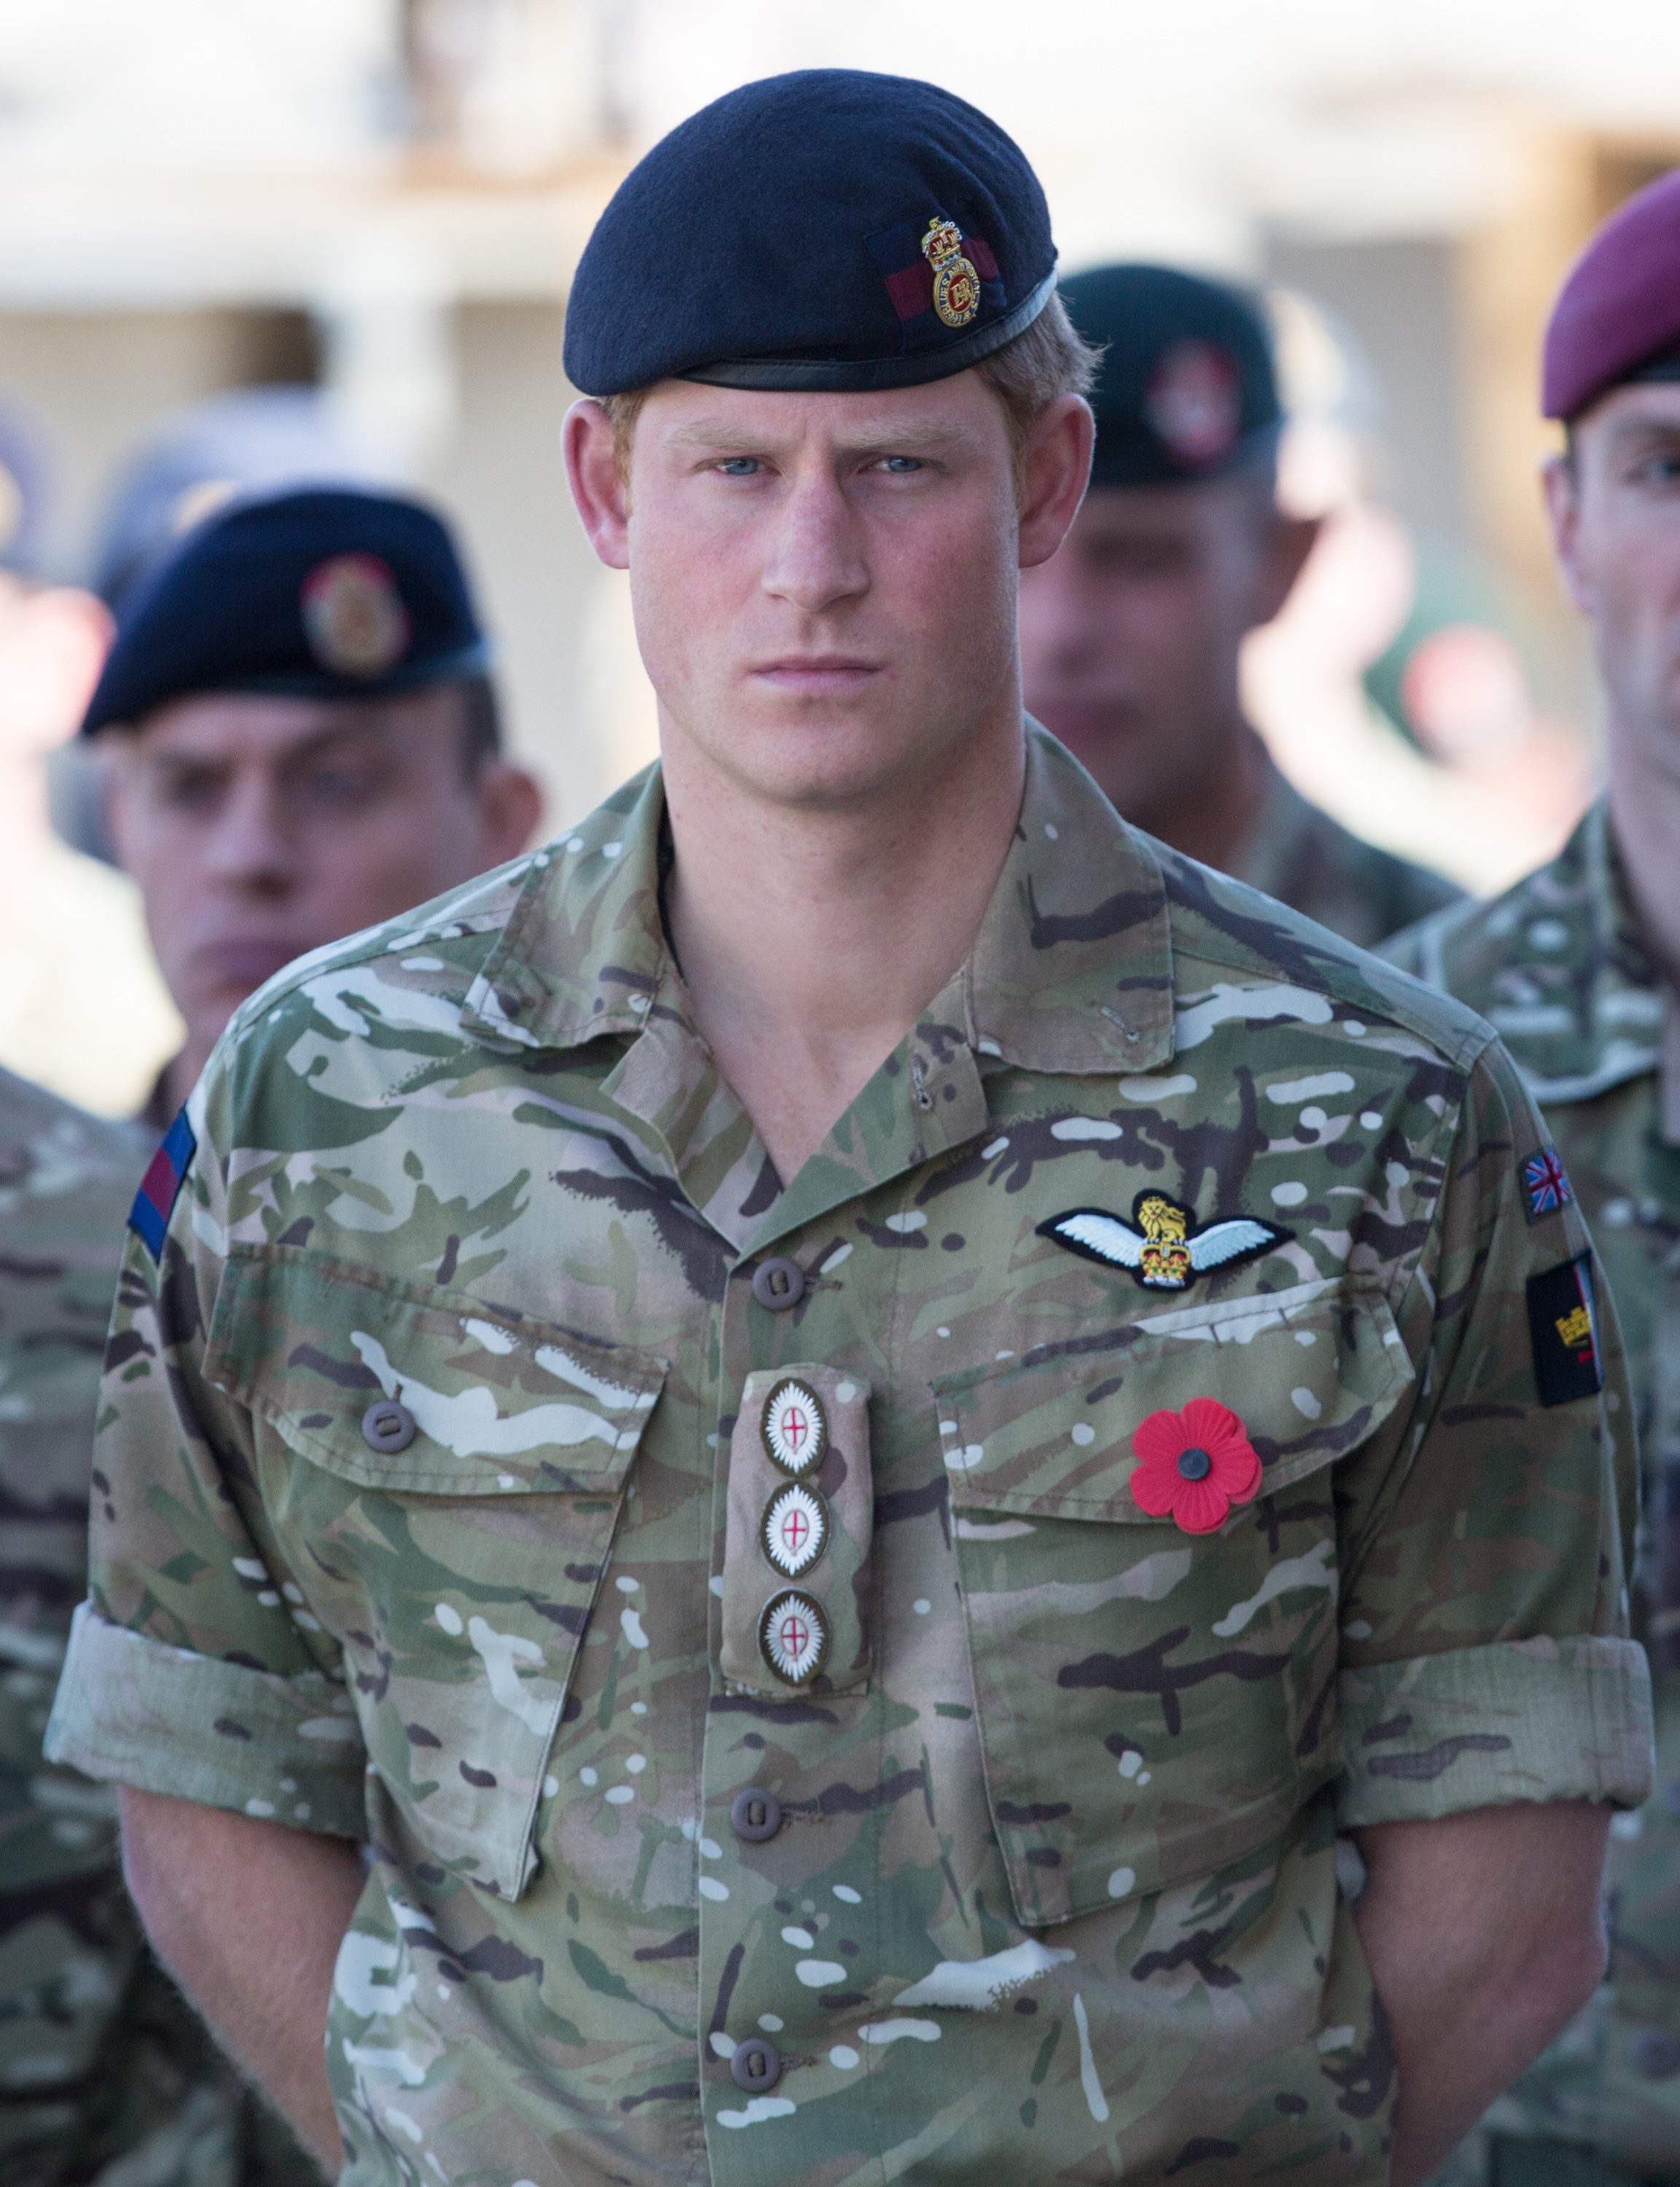 Prince Harry at a Remembrance Sunday service at Kandahar Airfield in Afghanistan on Nov. 9, 2014.